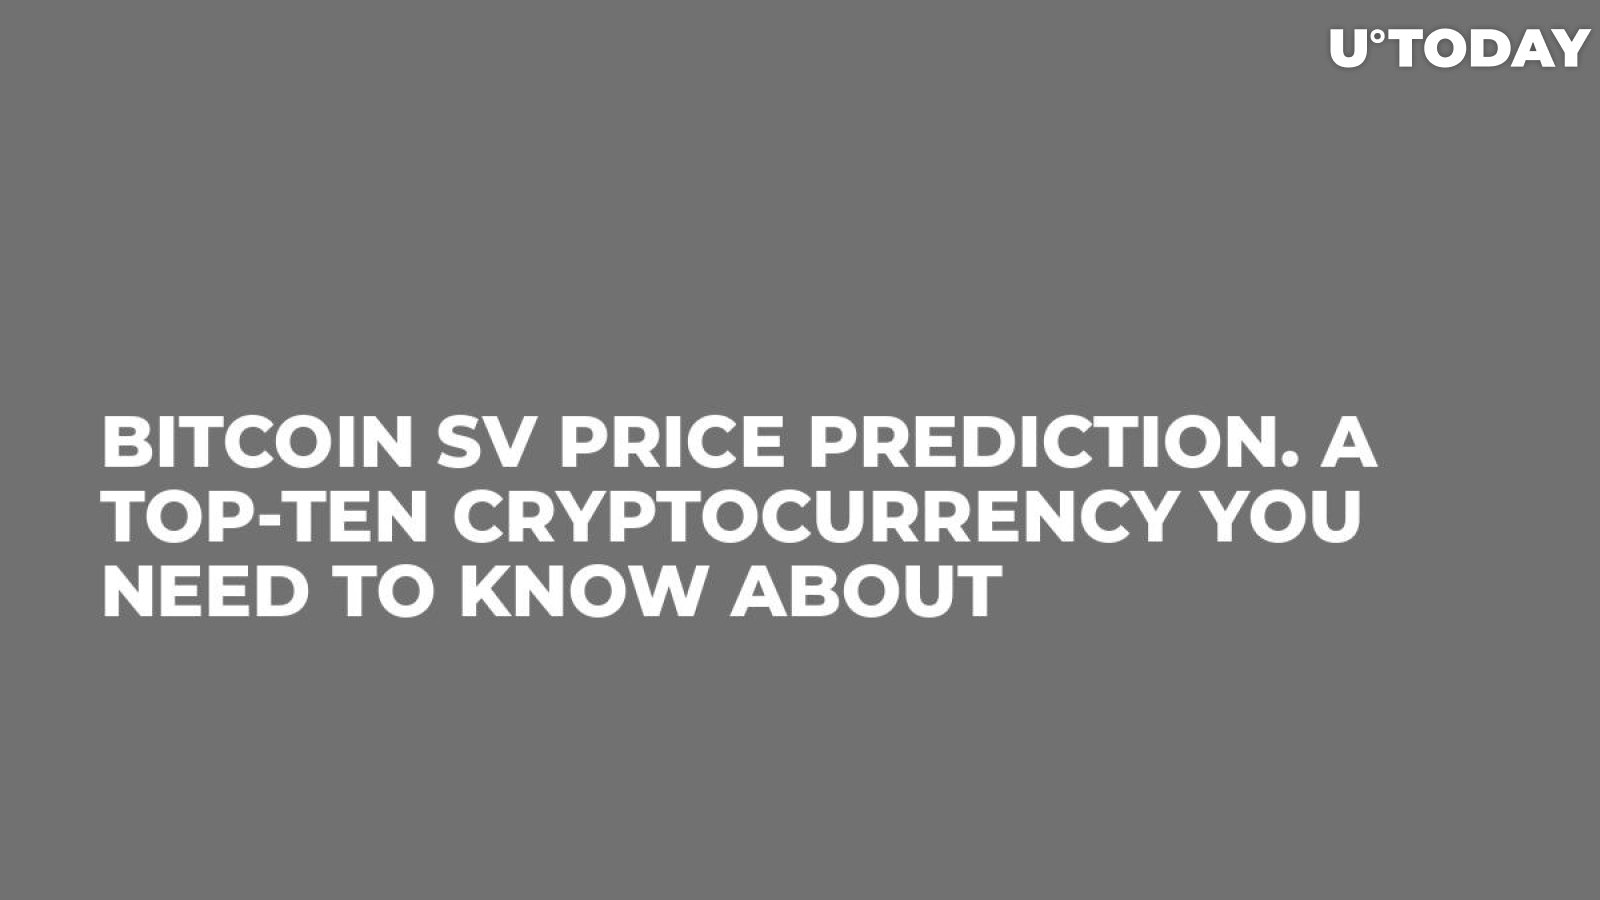 Bitcoin SV Price Prediction. A Top-Ten Cryptocurrency You Need to Know About